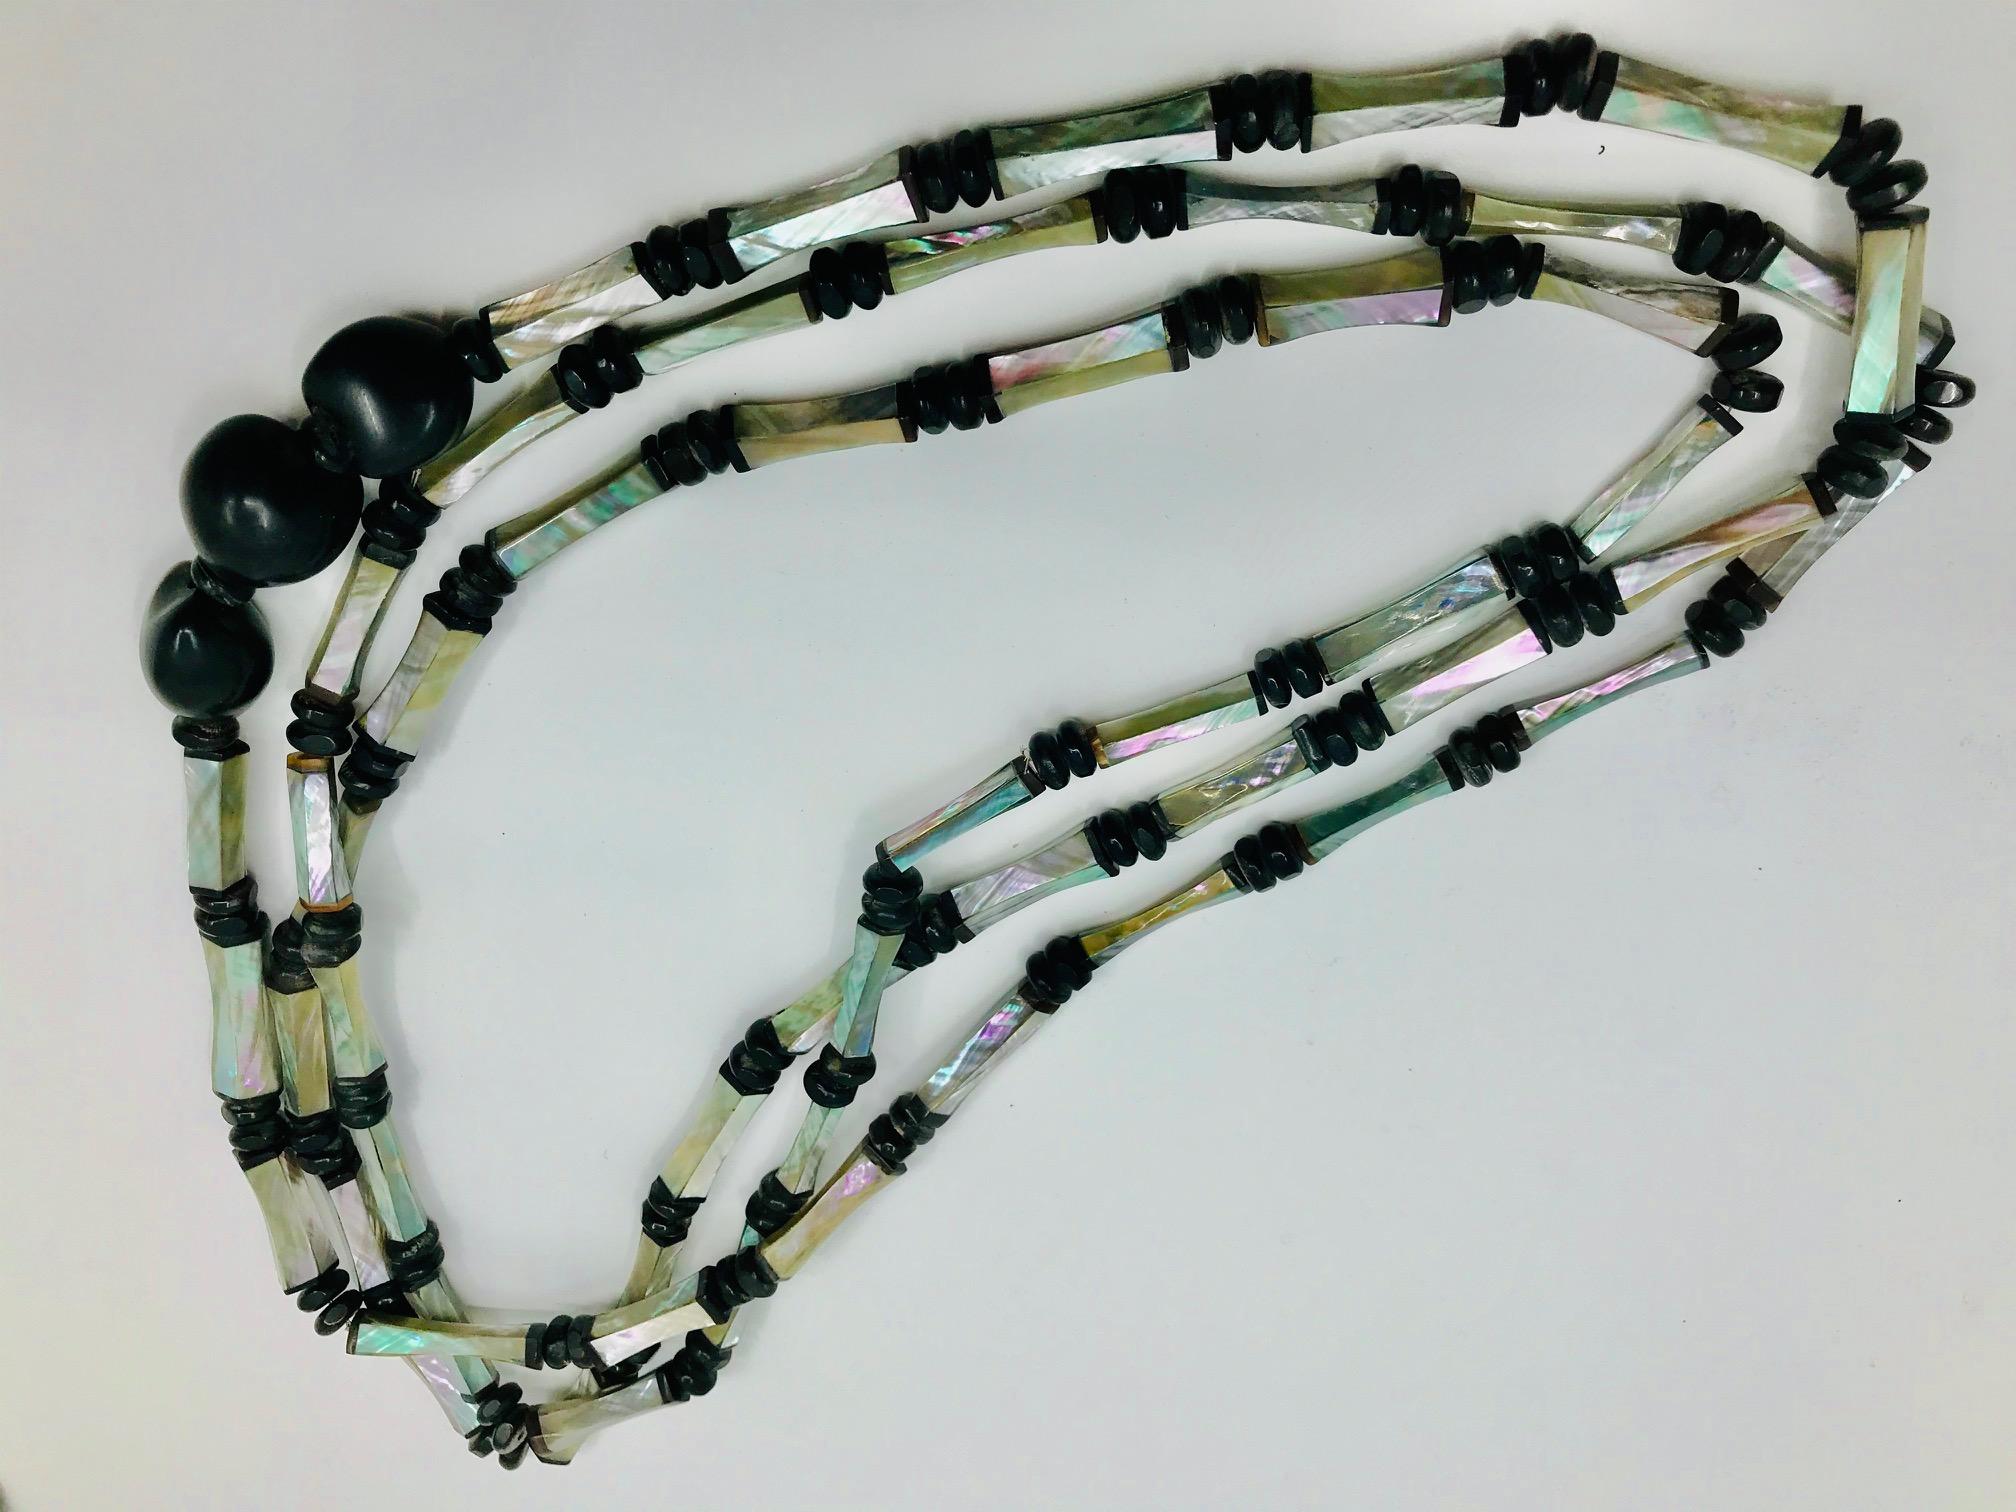  Long 3 strand Necklace with  up-cycled turquoise Art Deco Abalone beads. The beads are exquisitely hand crafted from thin Abalone /Haliotis hand cut pieces with black bone ends.The long Necklace spacers are  small wooden beads . As an accent it has